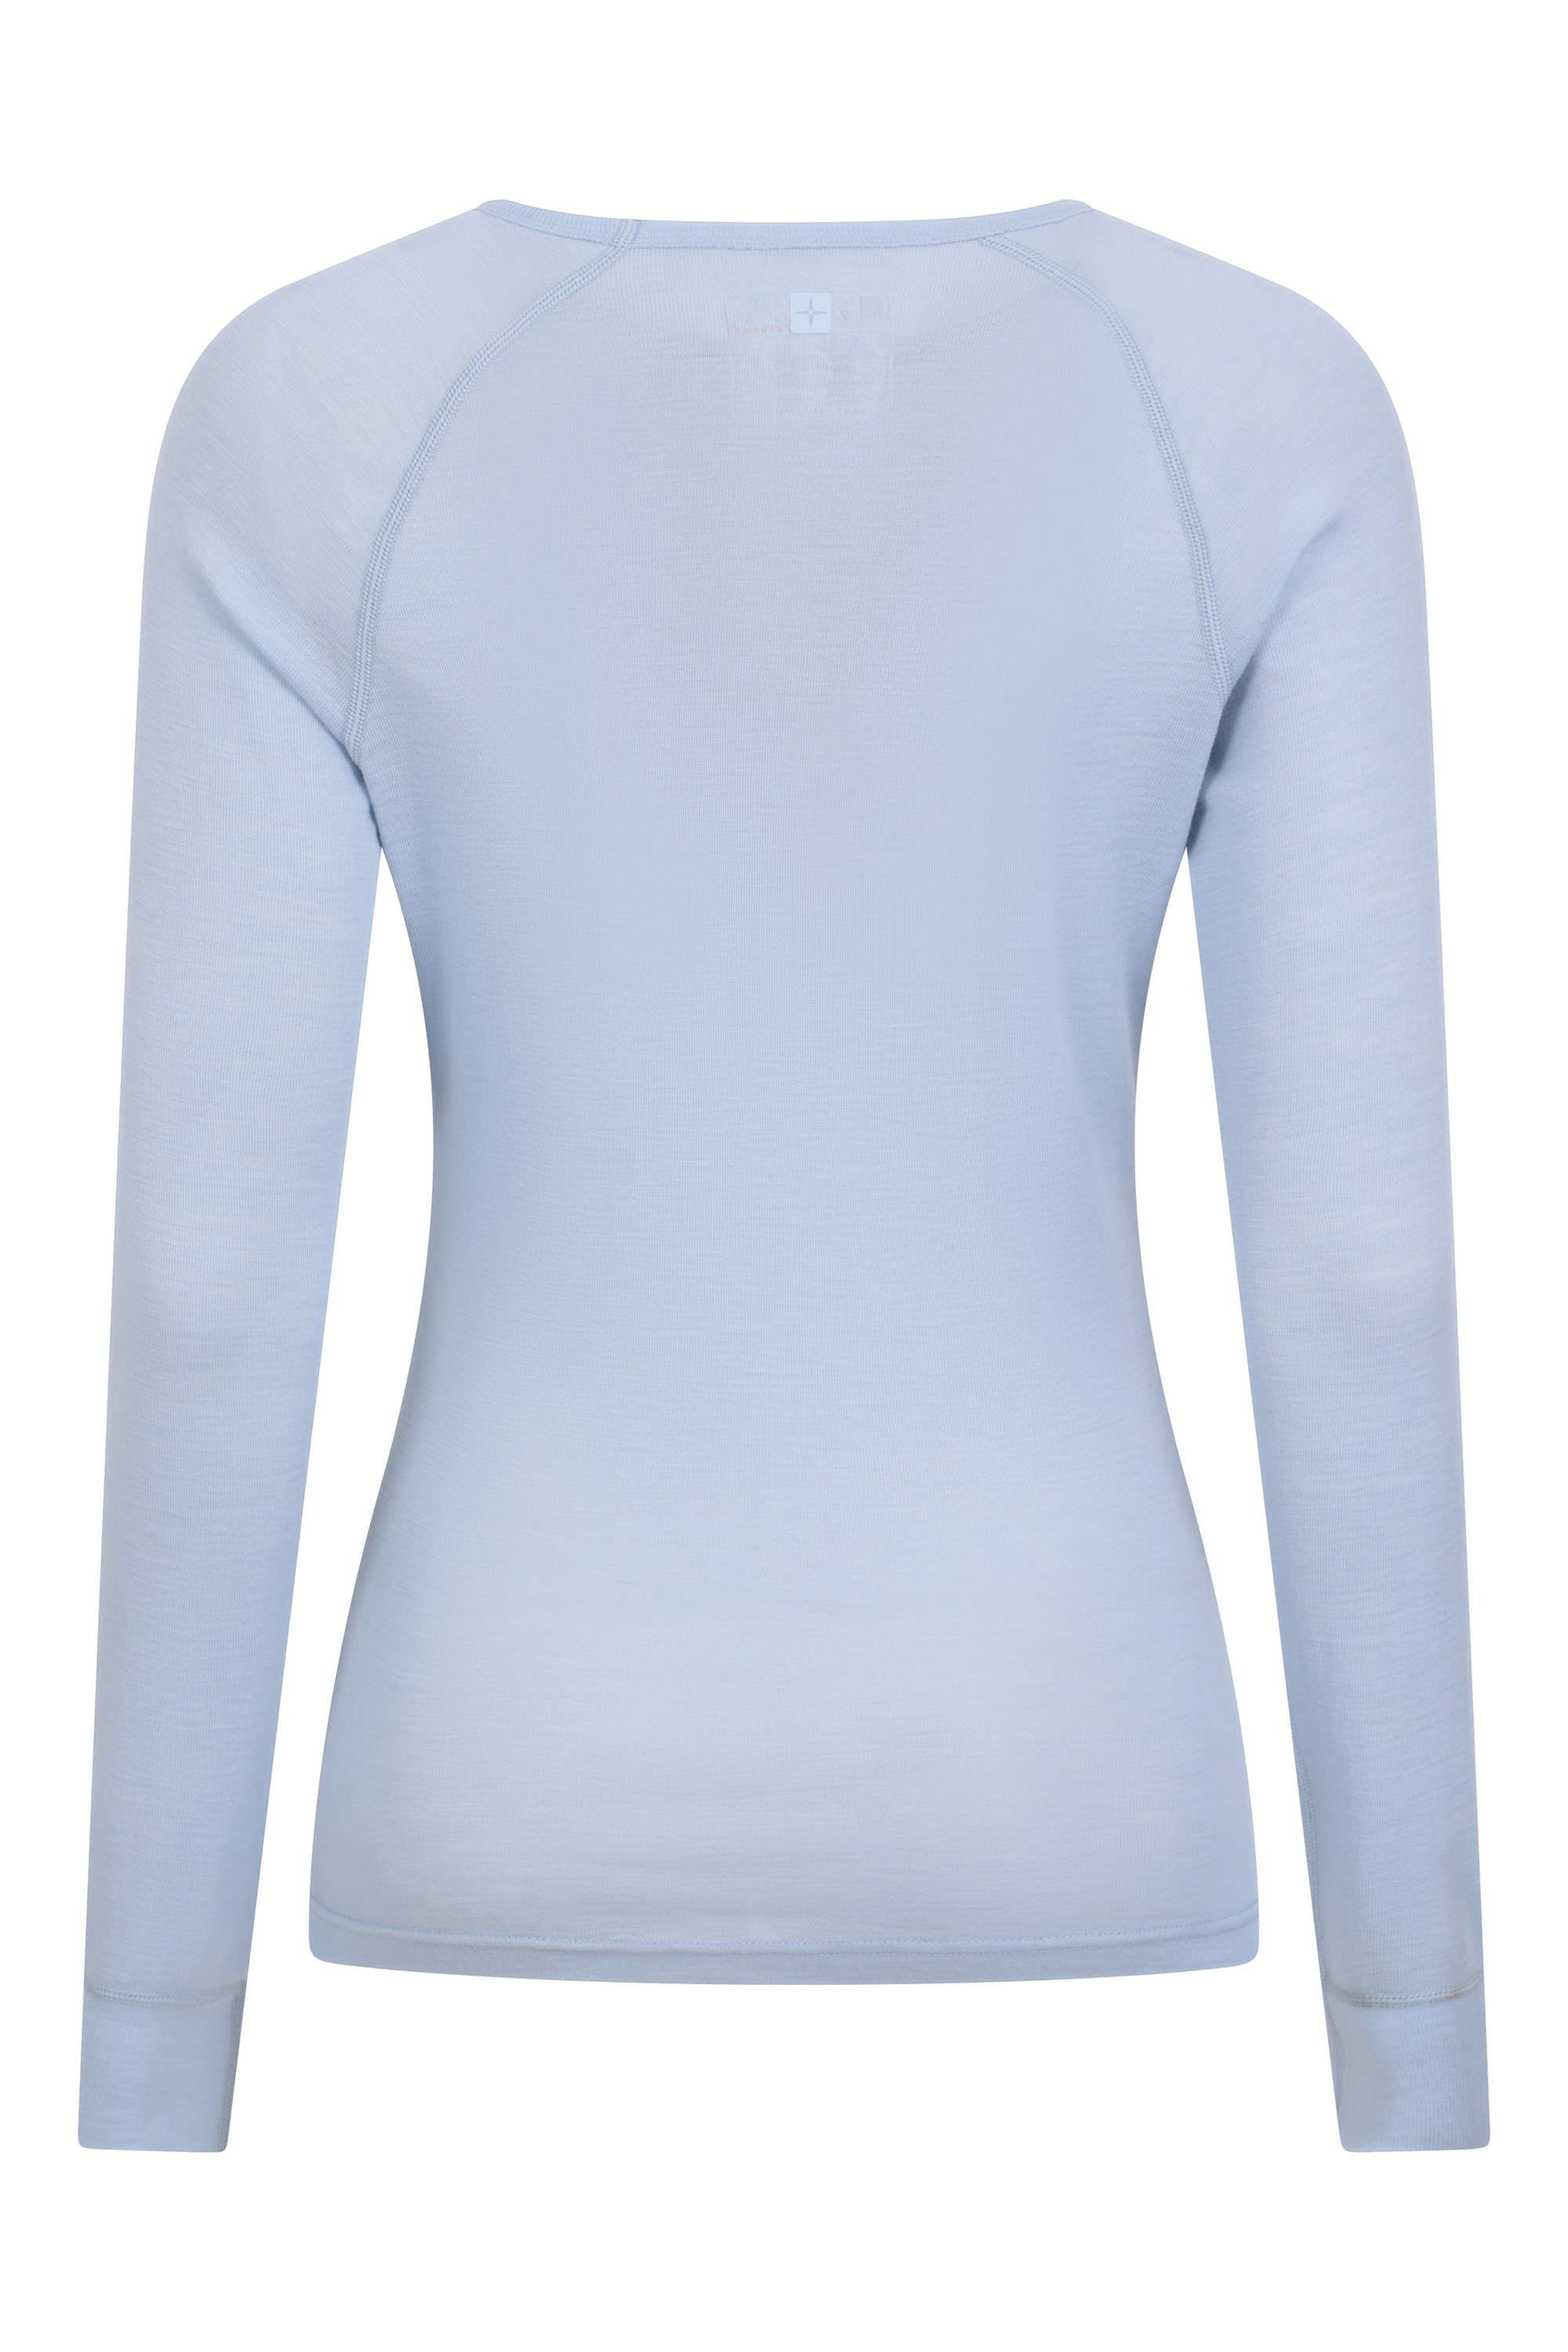 Call On Me Baselayer Top (women)  Ski Thermals - OOSC Clothing – OOSC  Clothing - AUS/NZ